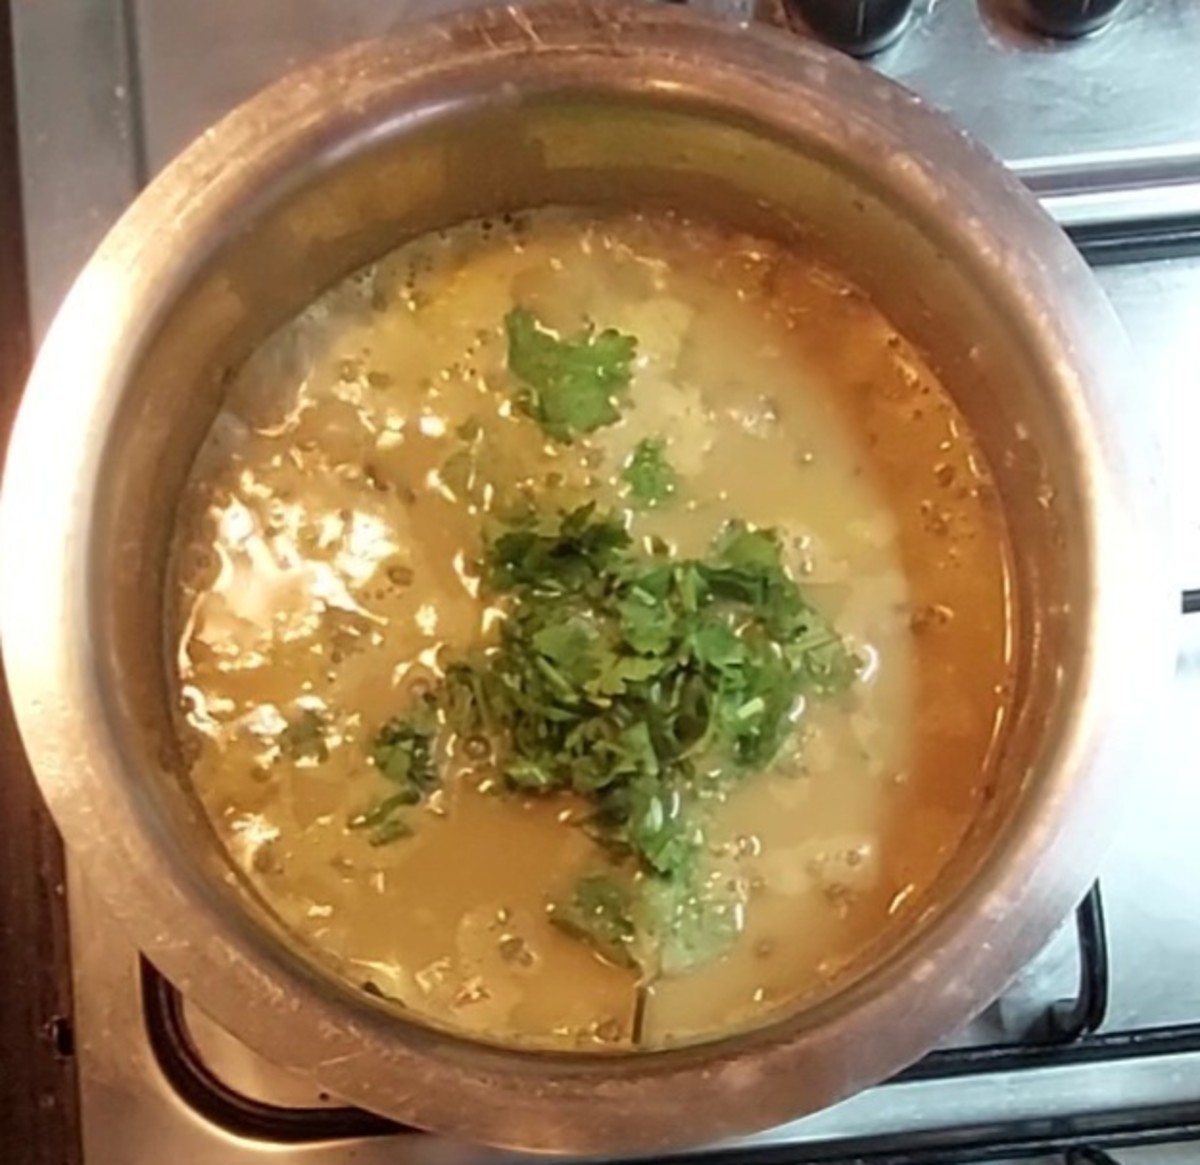 Add 1/4 cup chopped coriander leaves.